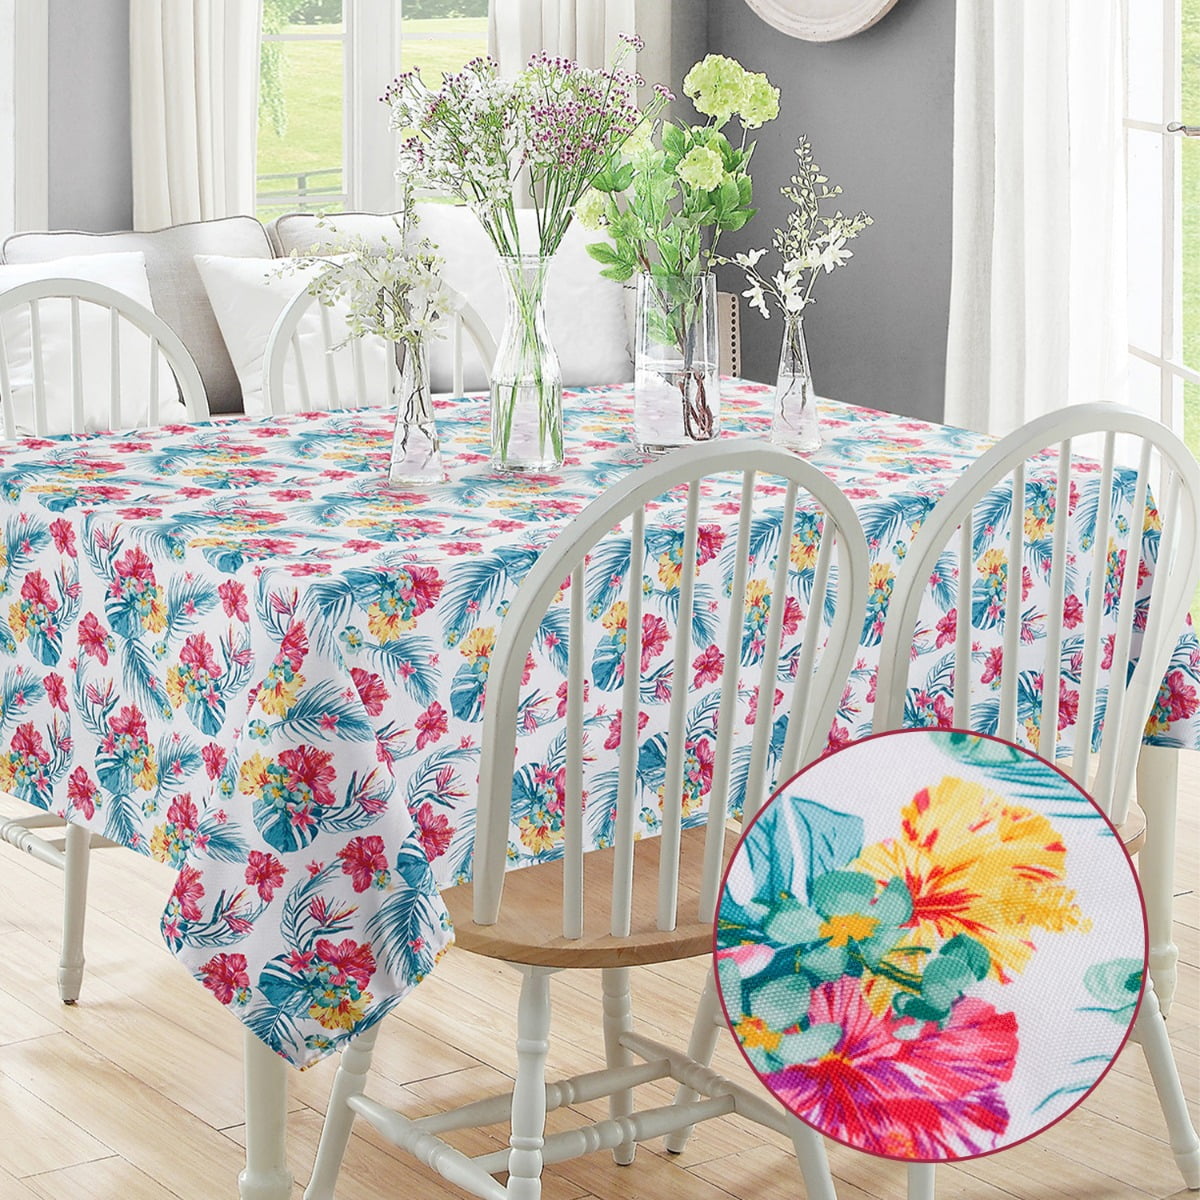 Love Hearts Romance Designs PVC Tablecloth Vinyl Oilcloth Kitchen Dining Table 